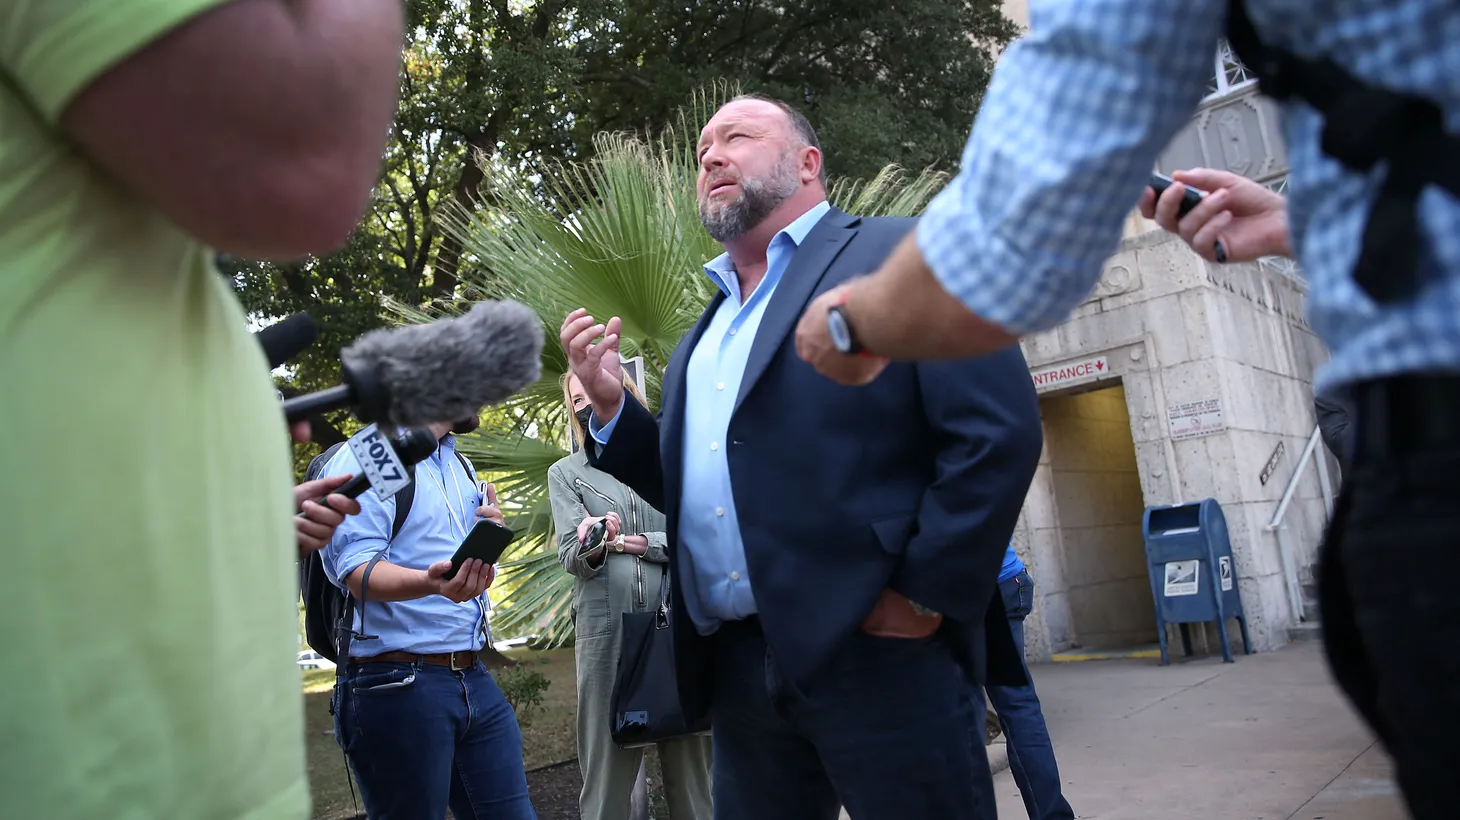 Alex Jones steps outside of the Travis County Courthouse to speak with media after he was questioned under oath about text messages and emails by lawyer Mark Bankston, in Austin, Texas, U.S. August 3, 2022.